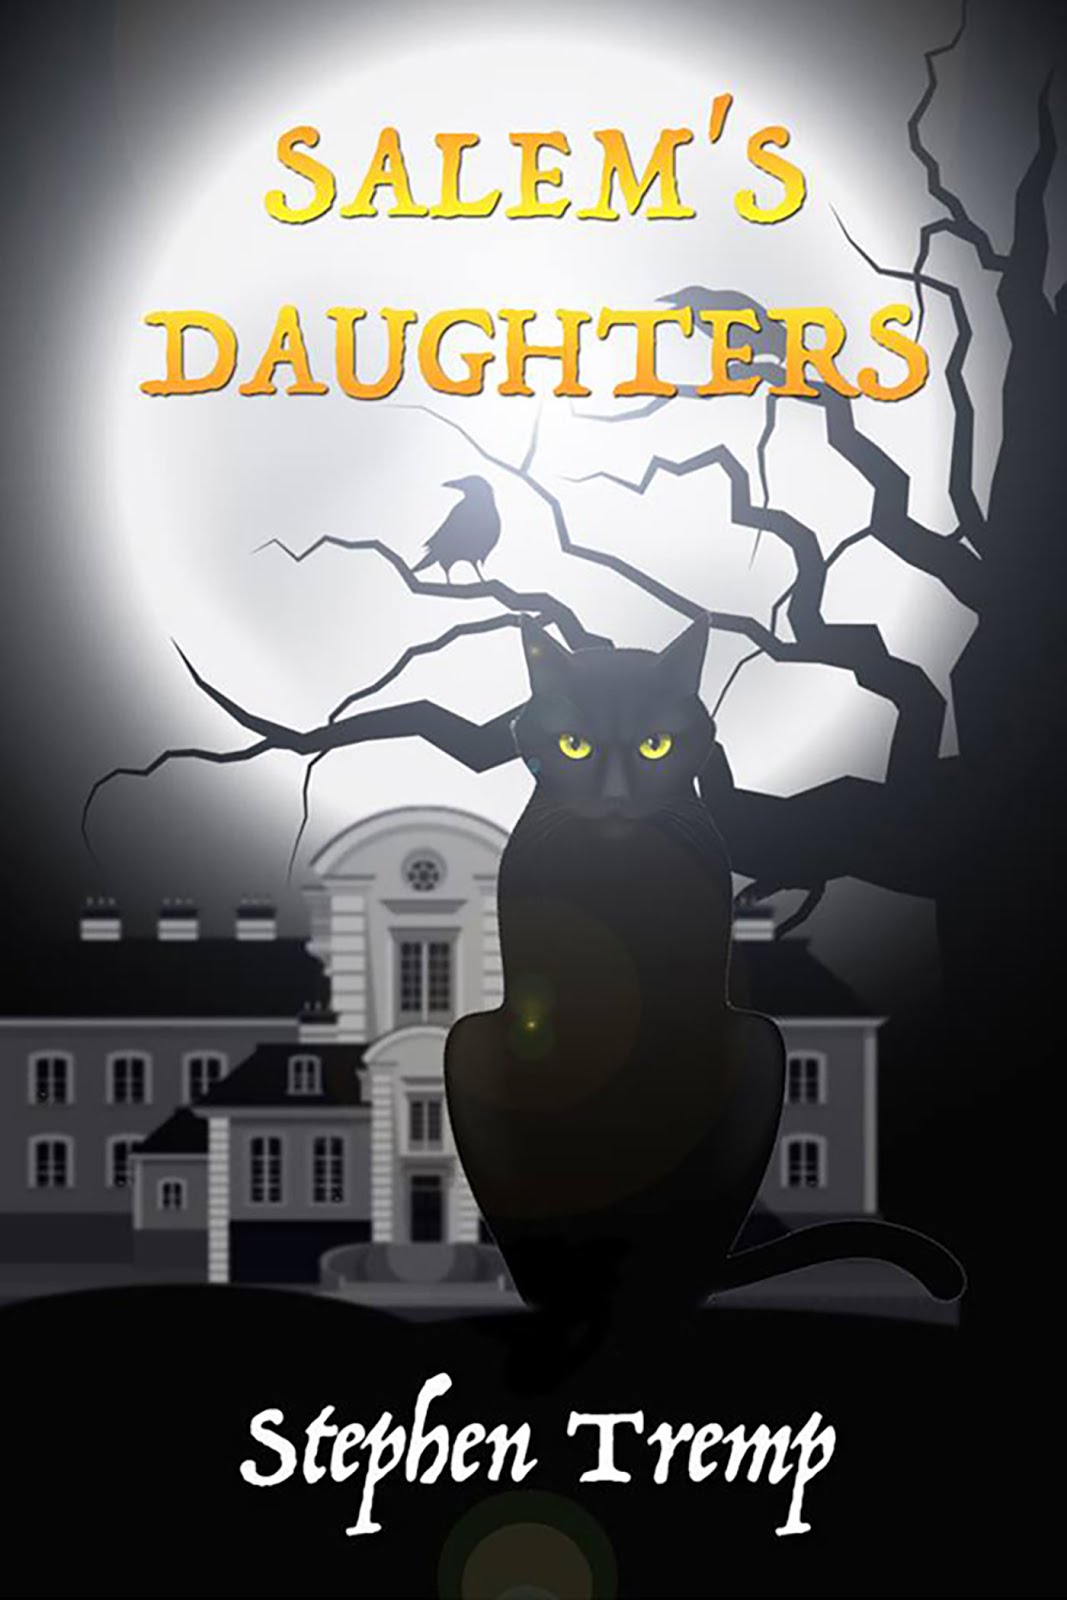 Preview Salem's Daughters